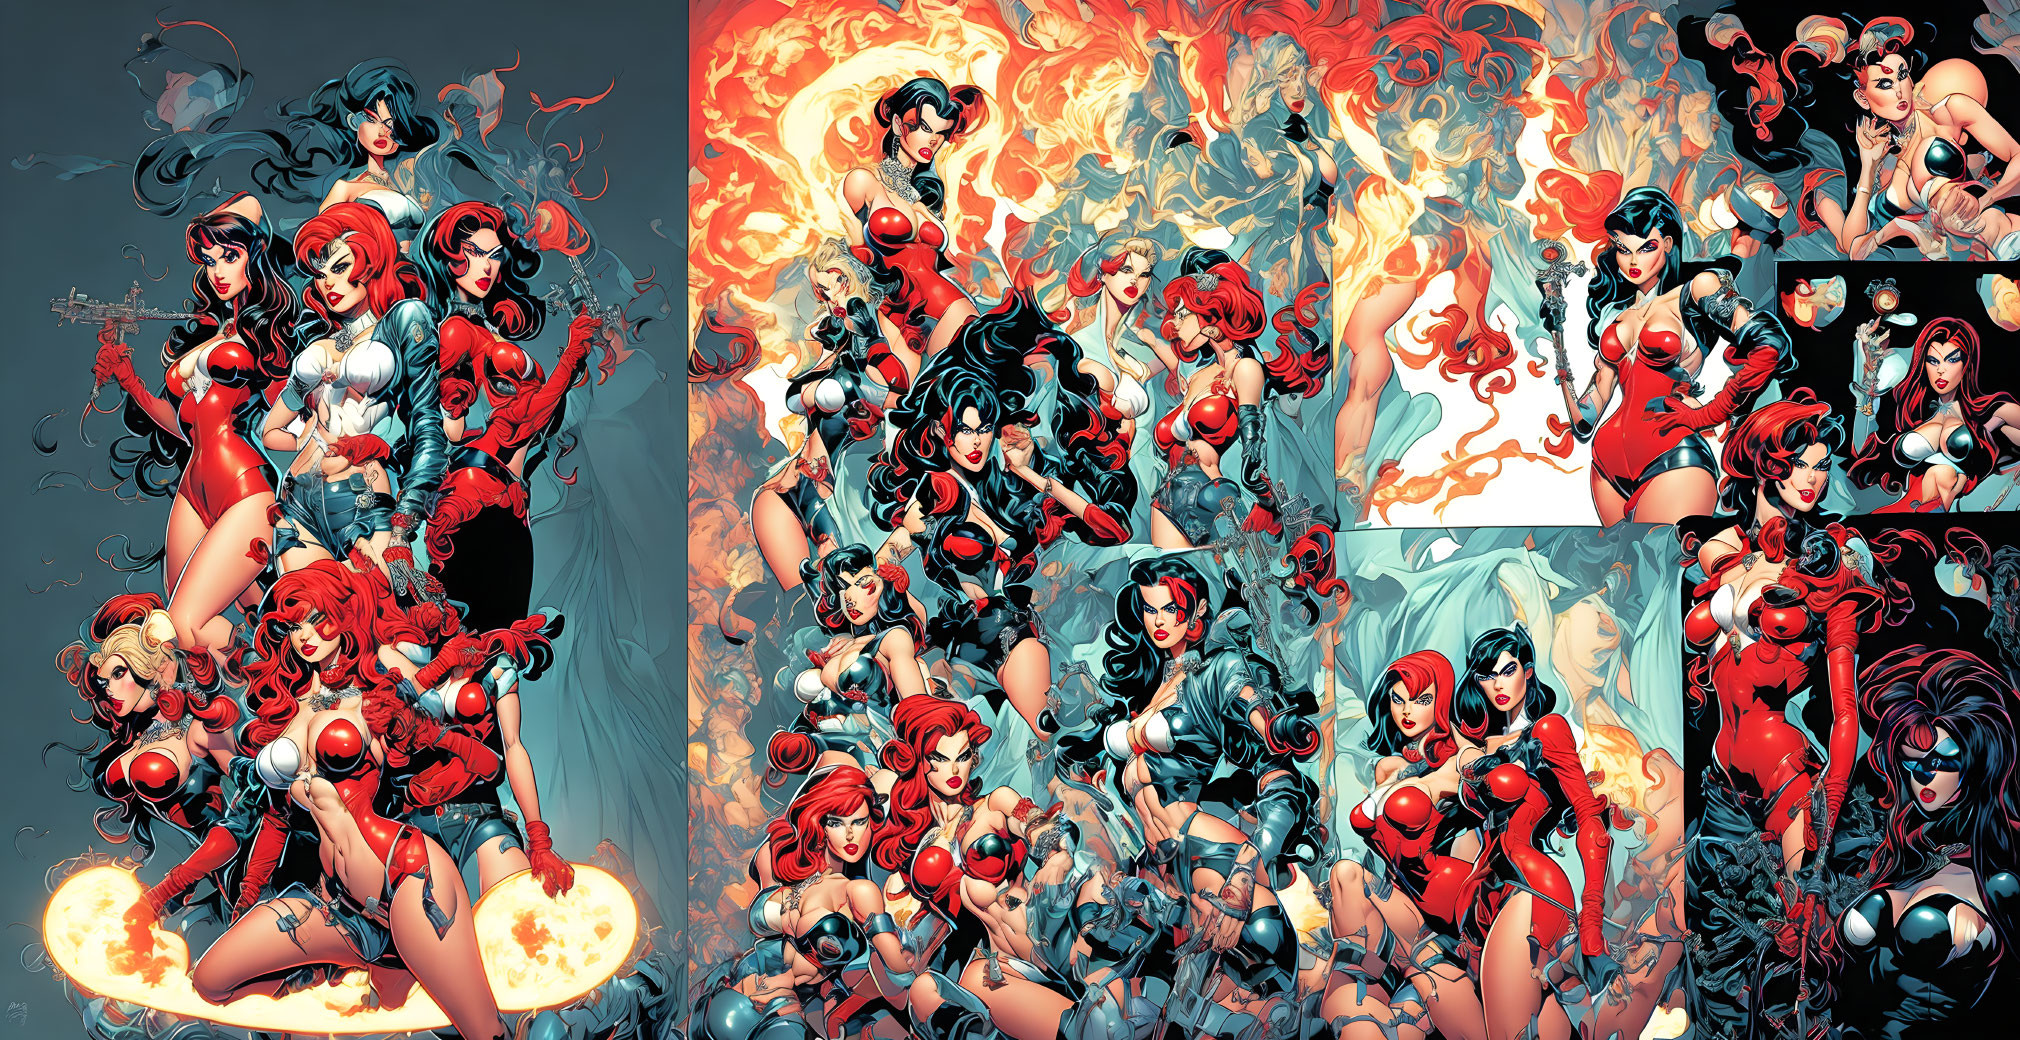 Dynamic superheroine illustrations: fire and ice themes, showcasing strength and powers